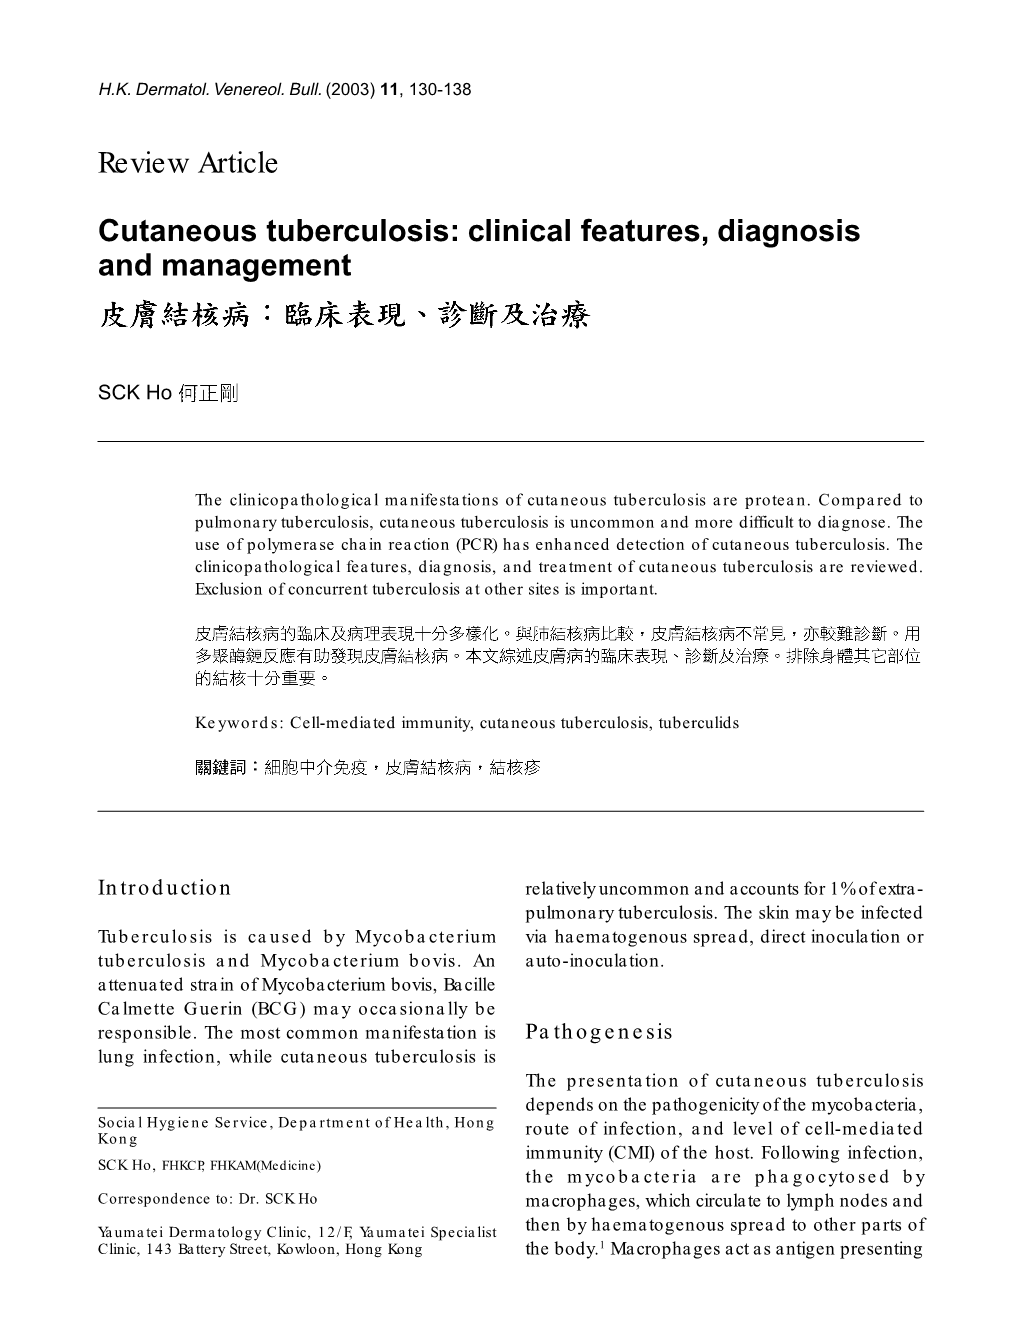 Cutaneous Tuberculosis: Clinical Features, Diagnosis and Management